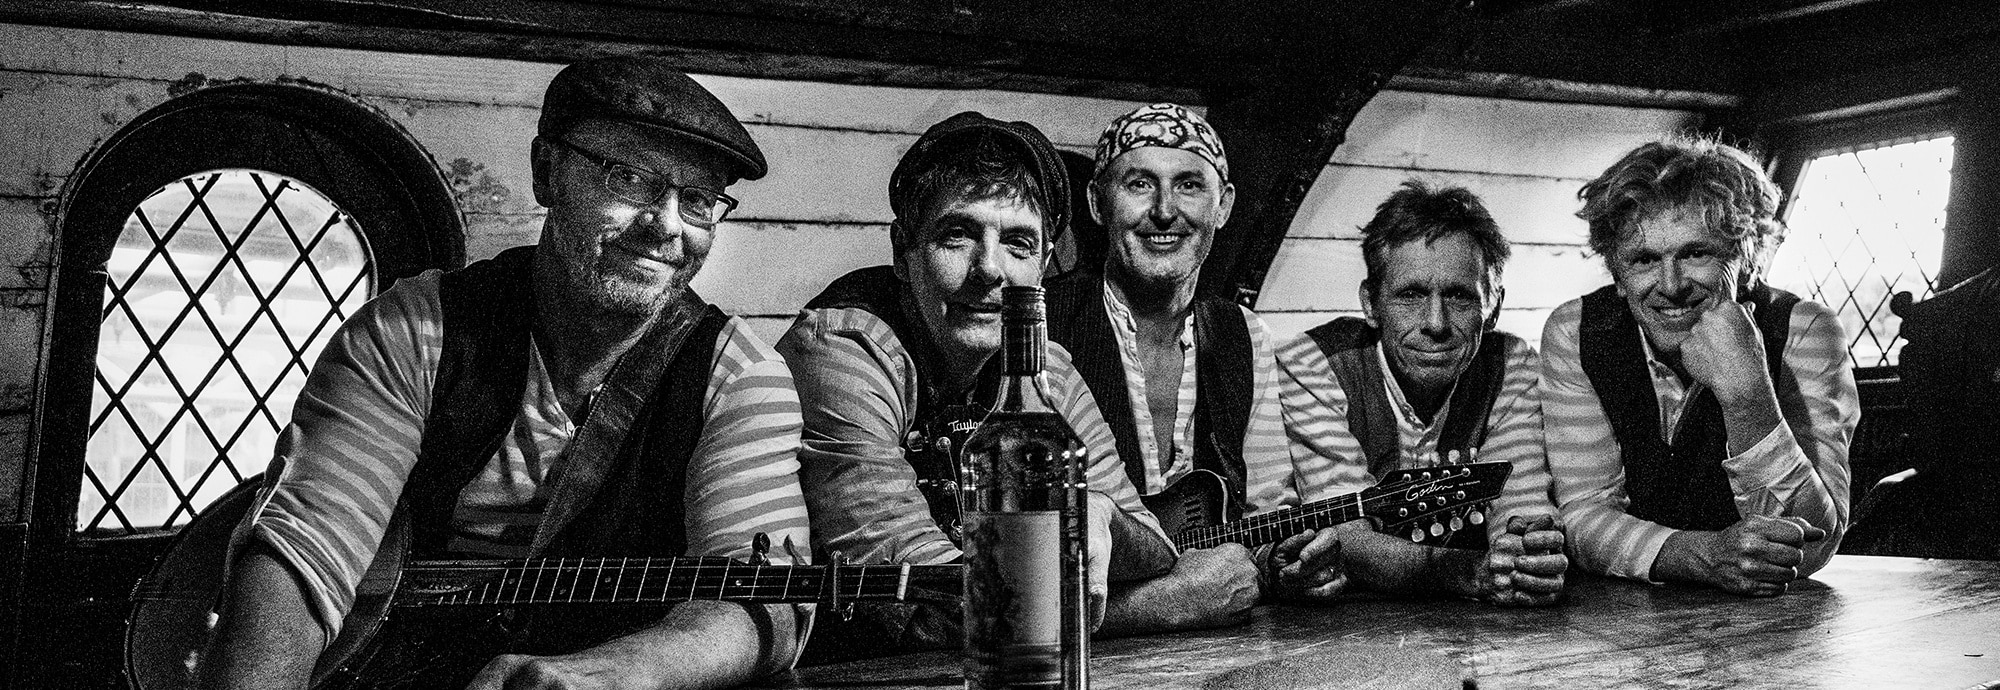 Black and white image of five men sat at a wooden table, smiling at the camera. Two wear caps, one wears a bandana. Two are holding guitars. A large bottle sits on the table in front of them.